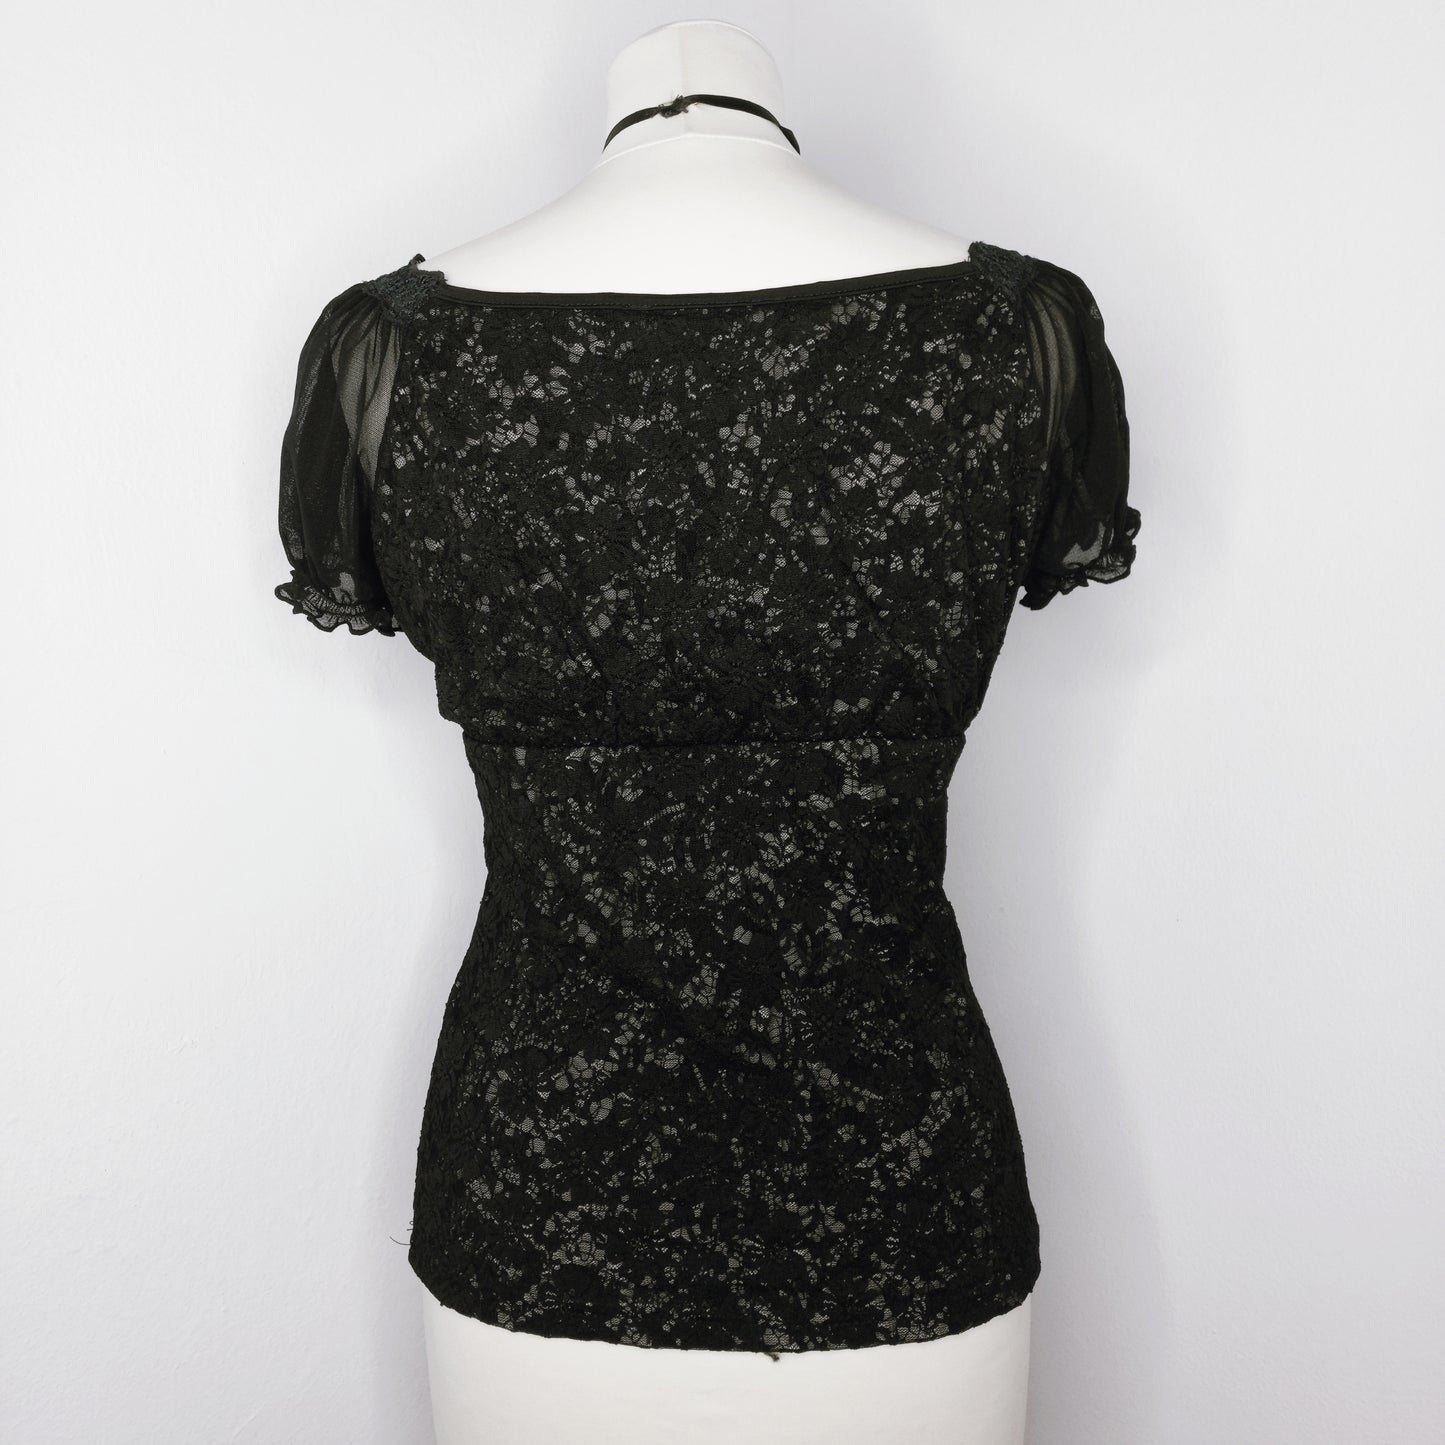 Milkmaid Lace Top - M